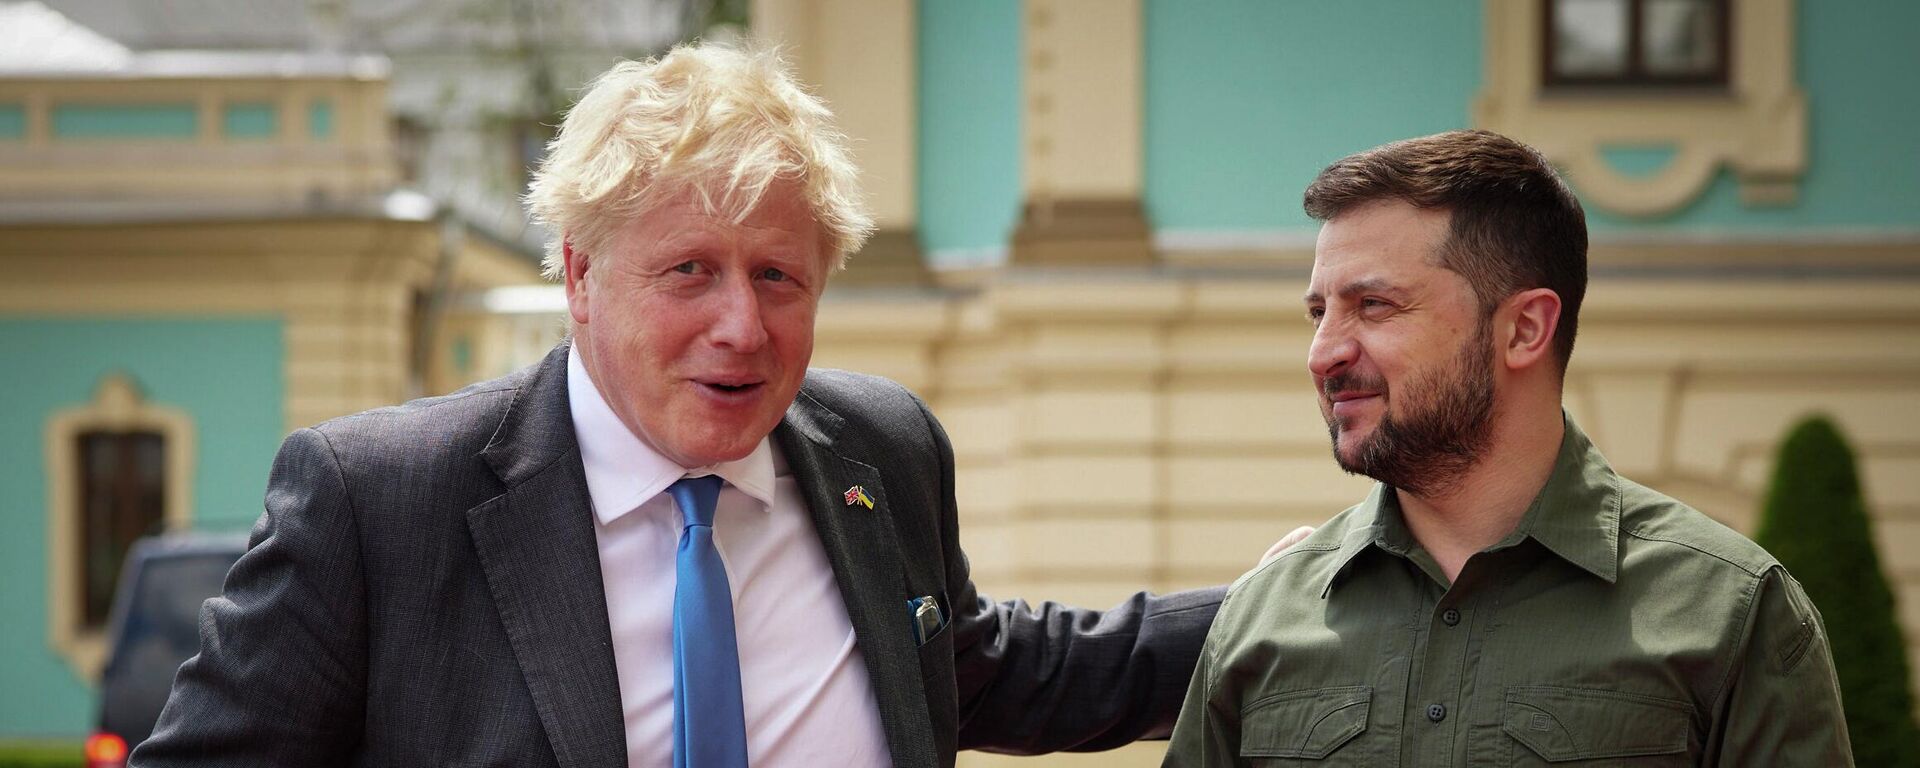 In this image provided by the Ukrainian Presidential Press Office, Ukrainian President Volodymyr Zelenskyy, right, and Britain's Prime Minister Boris Johnson, ahead of their meeting in Kyiv, Ukraine, Friday, June 17, 2022. (Ukrainian Presidential Press Office via AP) - Sputnik International, 1920, 25.08.2022